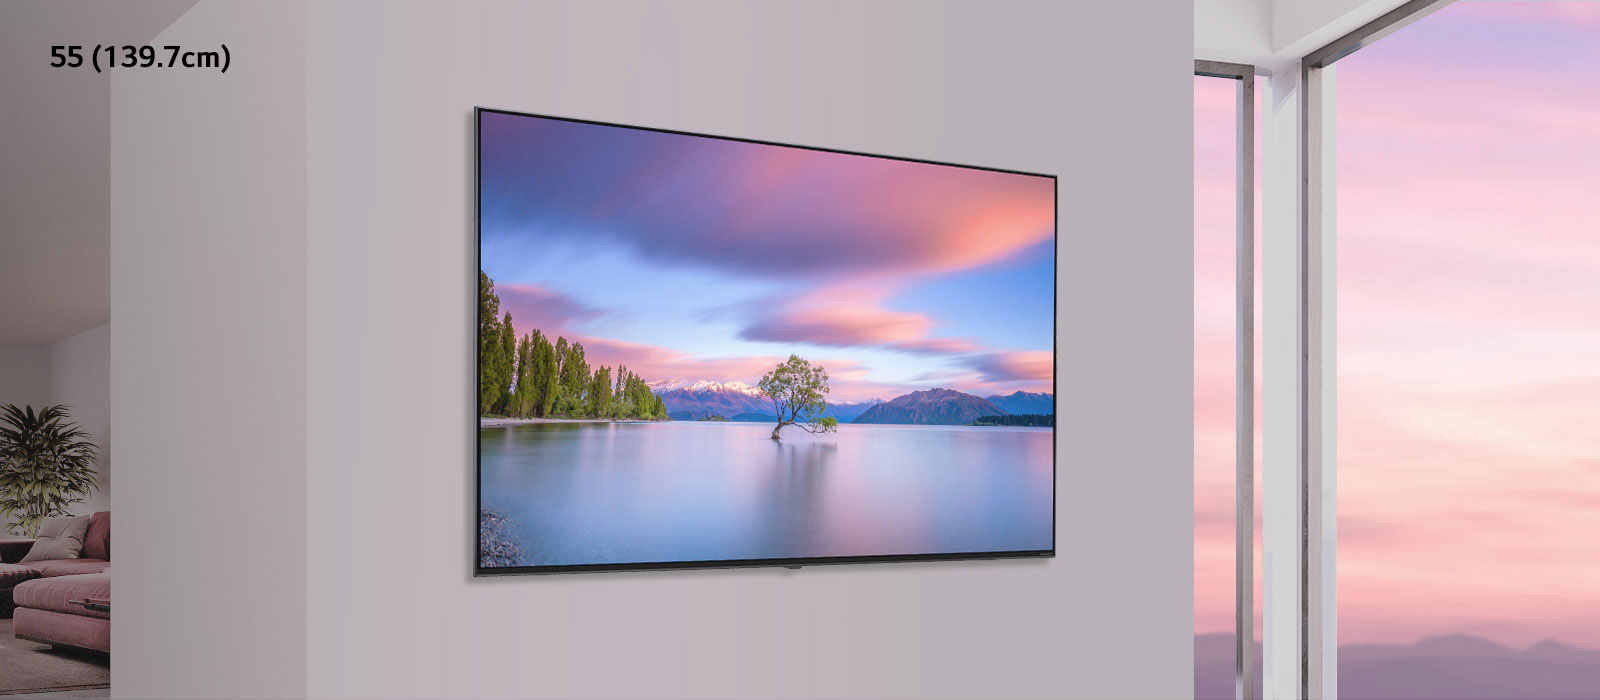 A scene depicting a flat-screen TV mounted on a white wall. As the image scrolls from side to side the image changes from a 55 (139.7cm) to 86 (218.44cm) TV.